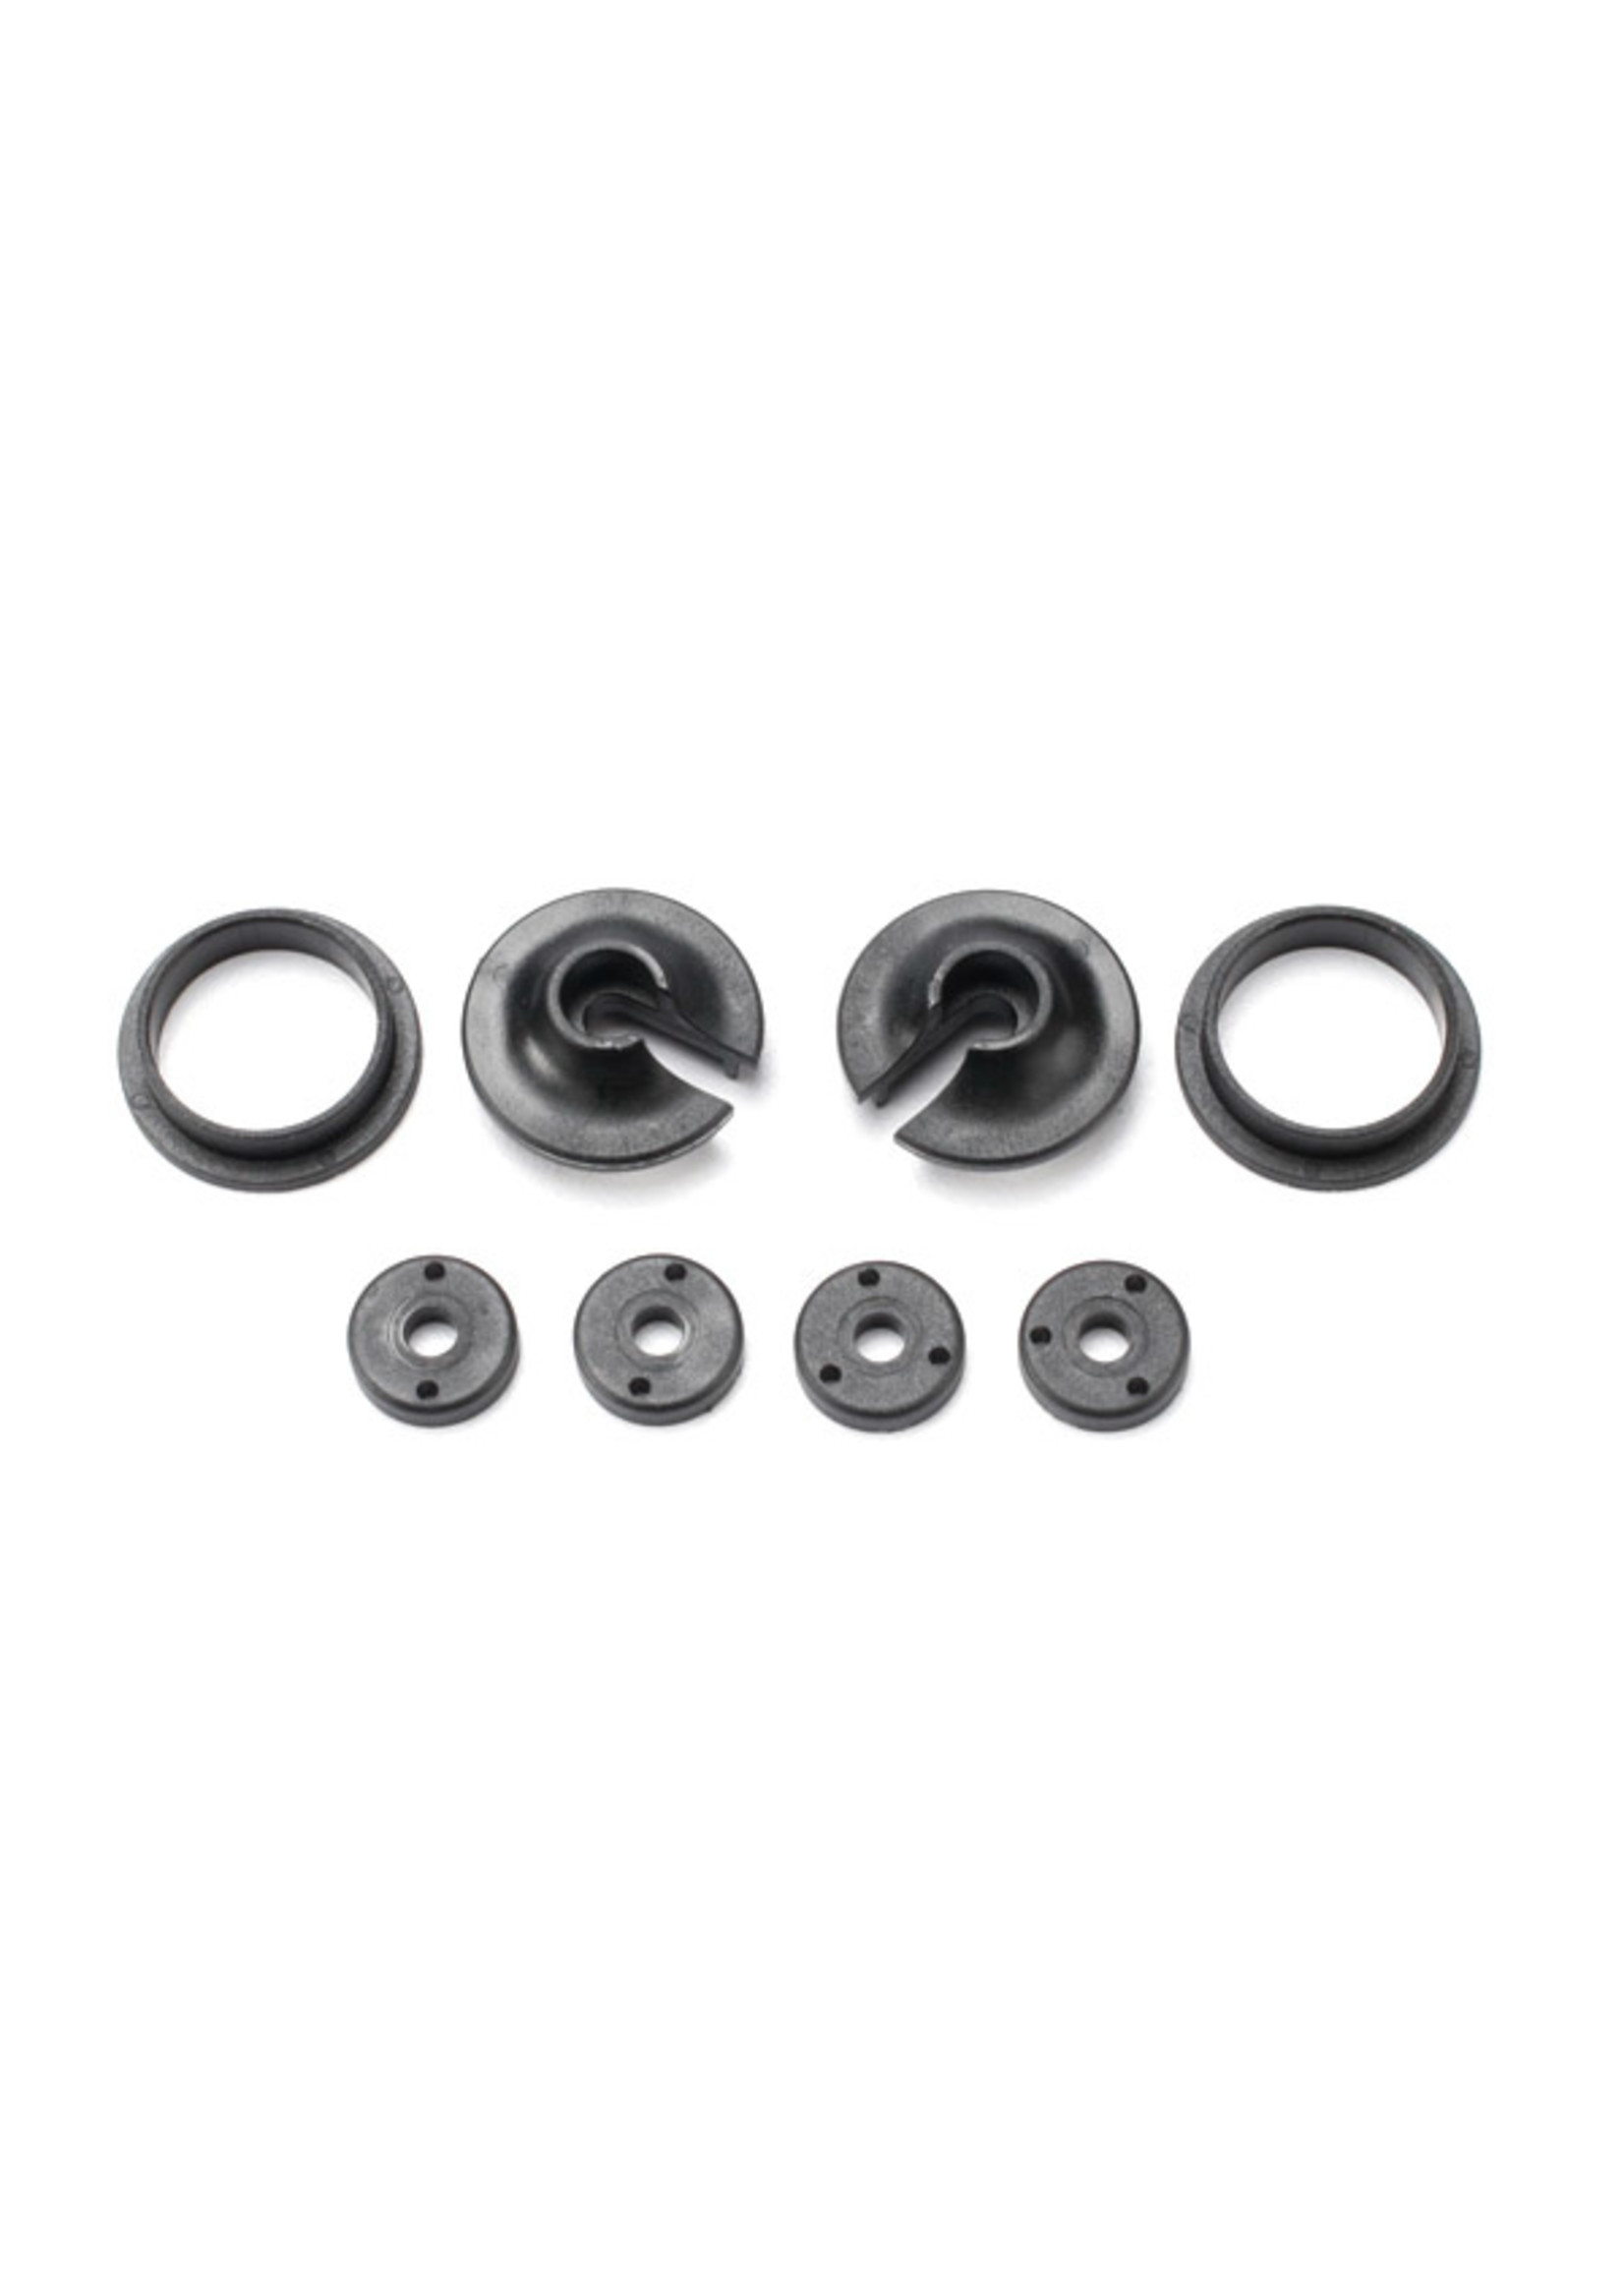 Traxxas 3768 - Shock Spring Retainers (Upper & Lower)